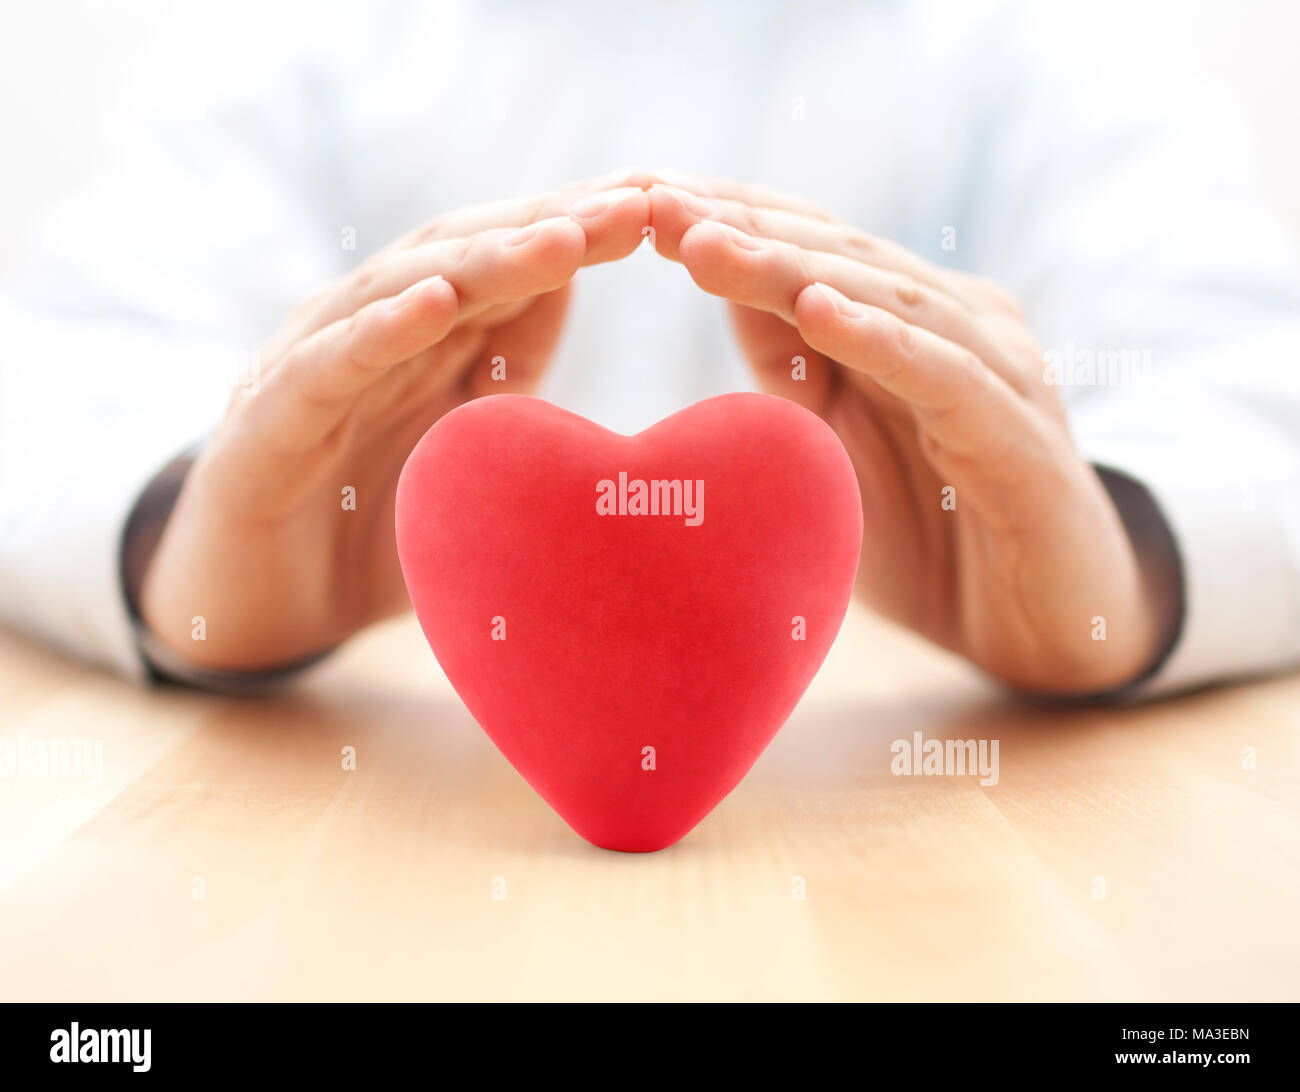 Red heart covered by hands. Health insurance or love concept Stock Photo